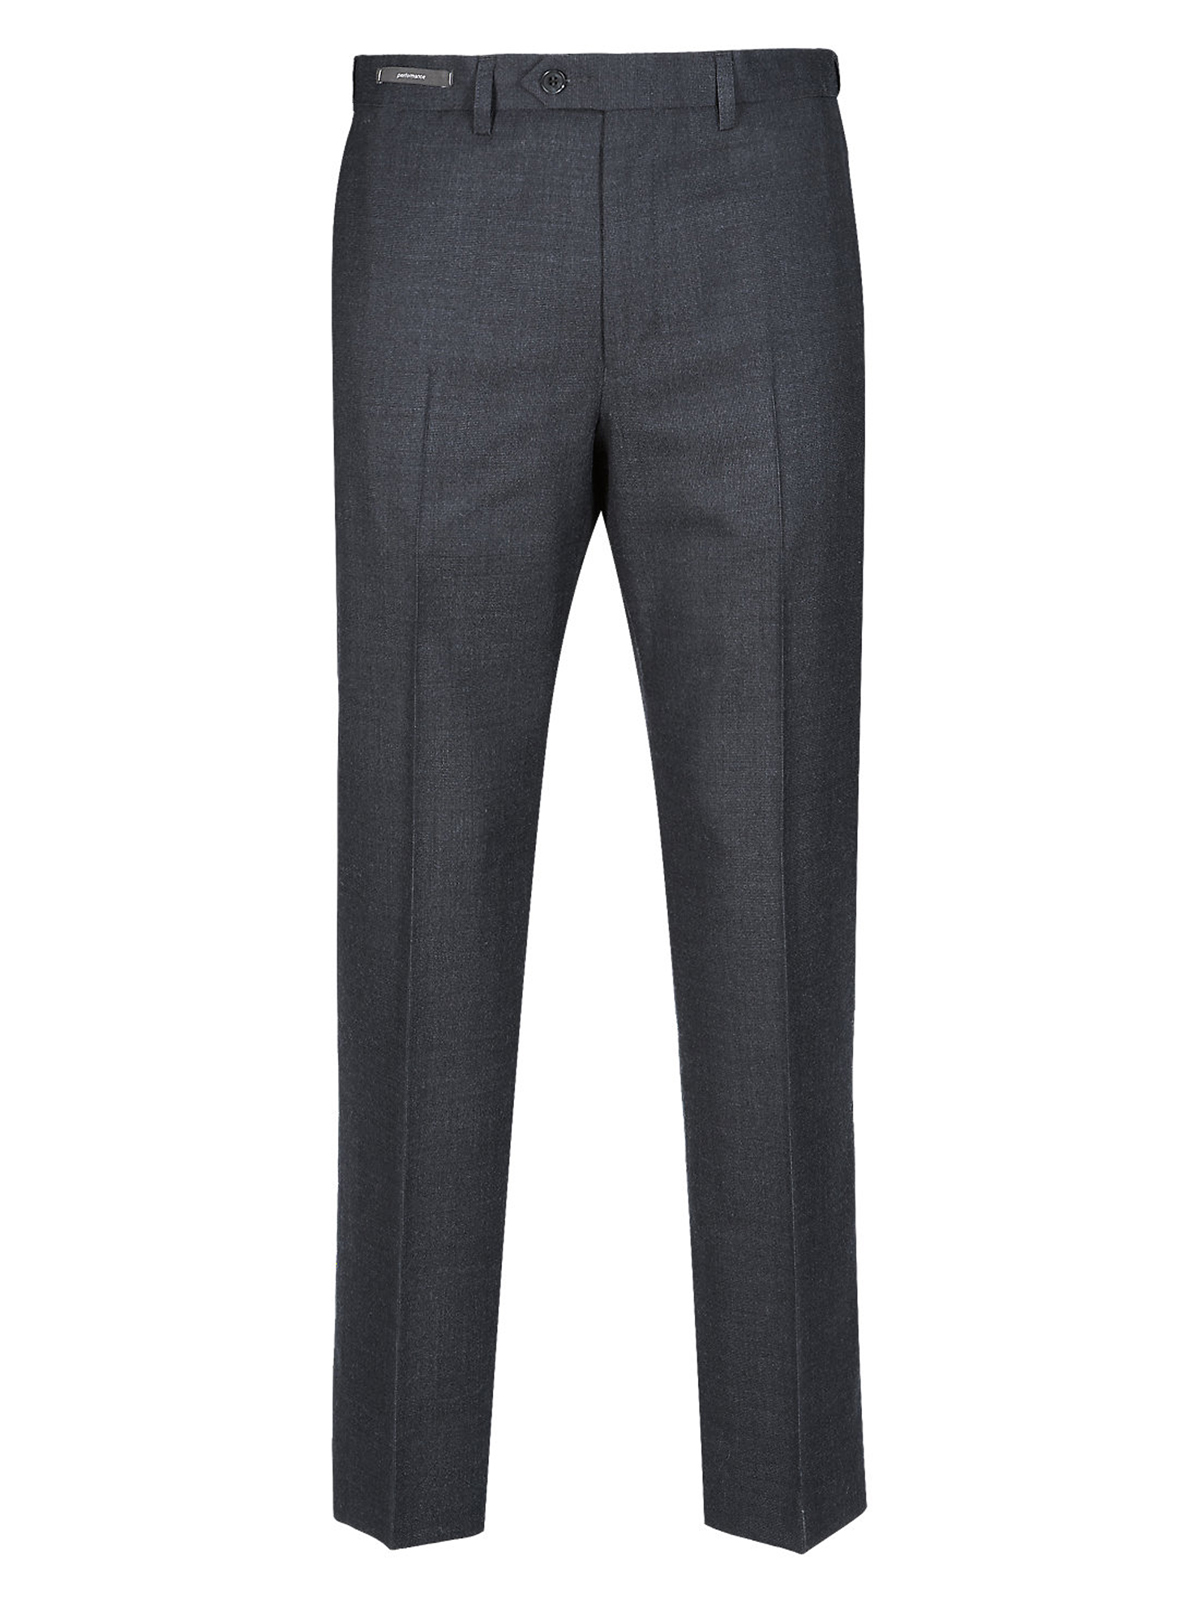 Marks and Spencer - - M&5 NAVY Active Waistband Flat Front Trousers ...